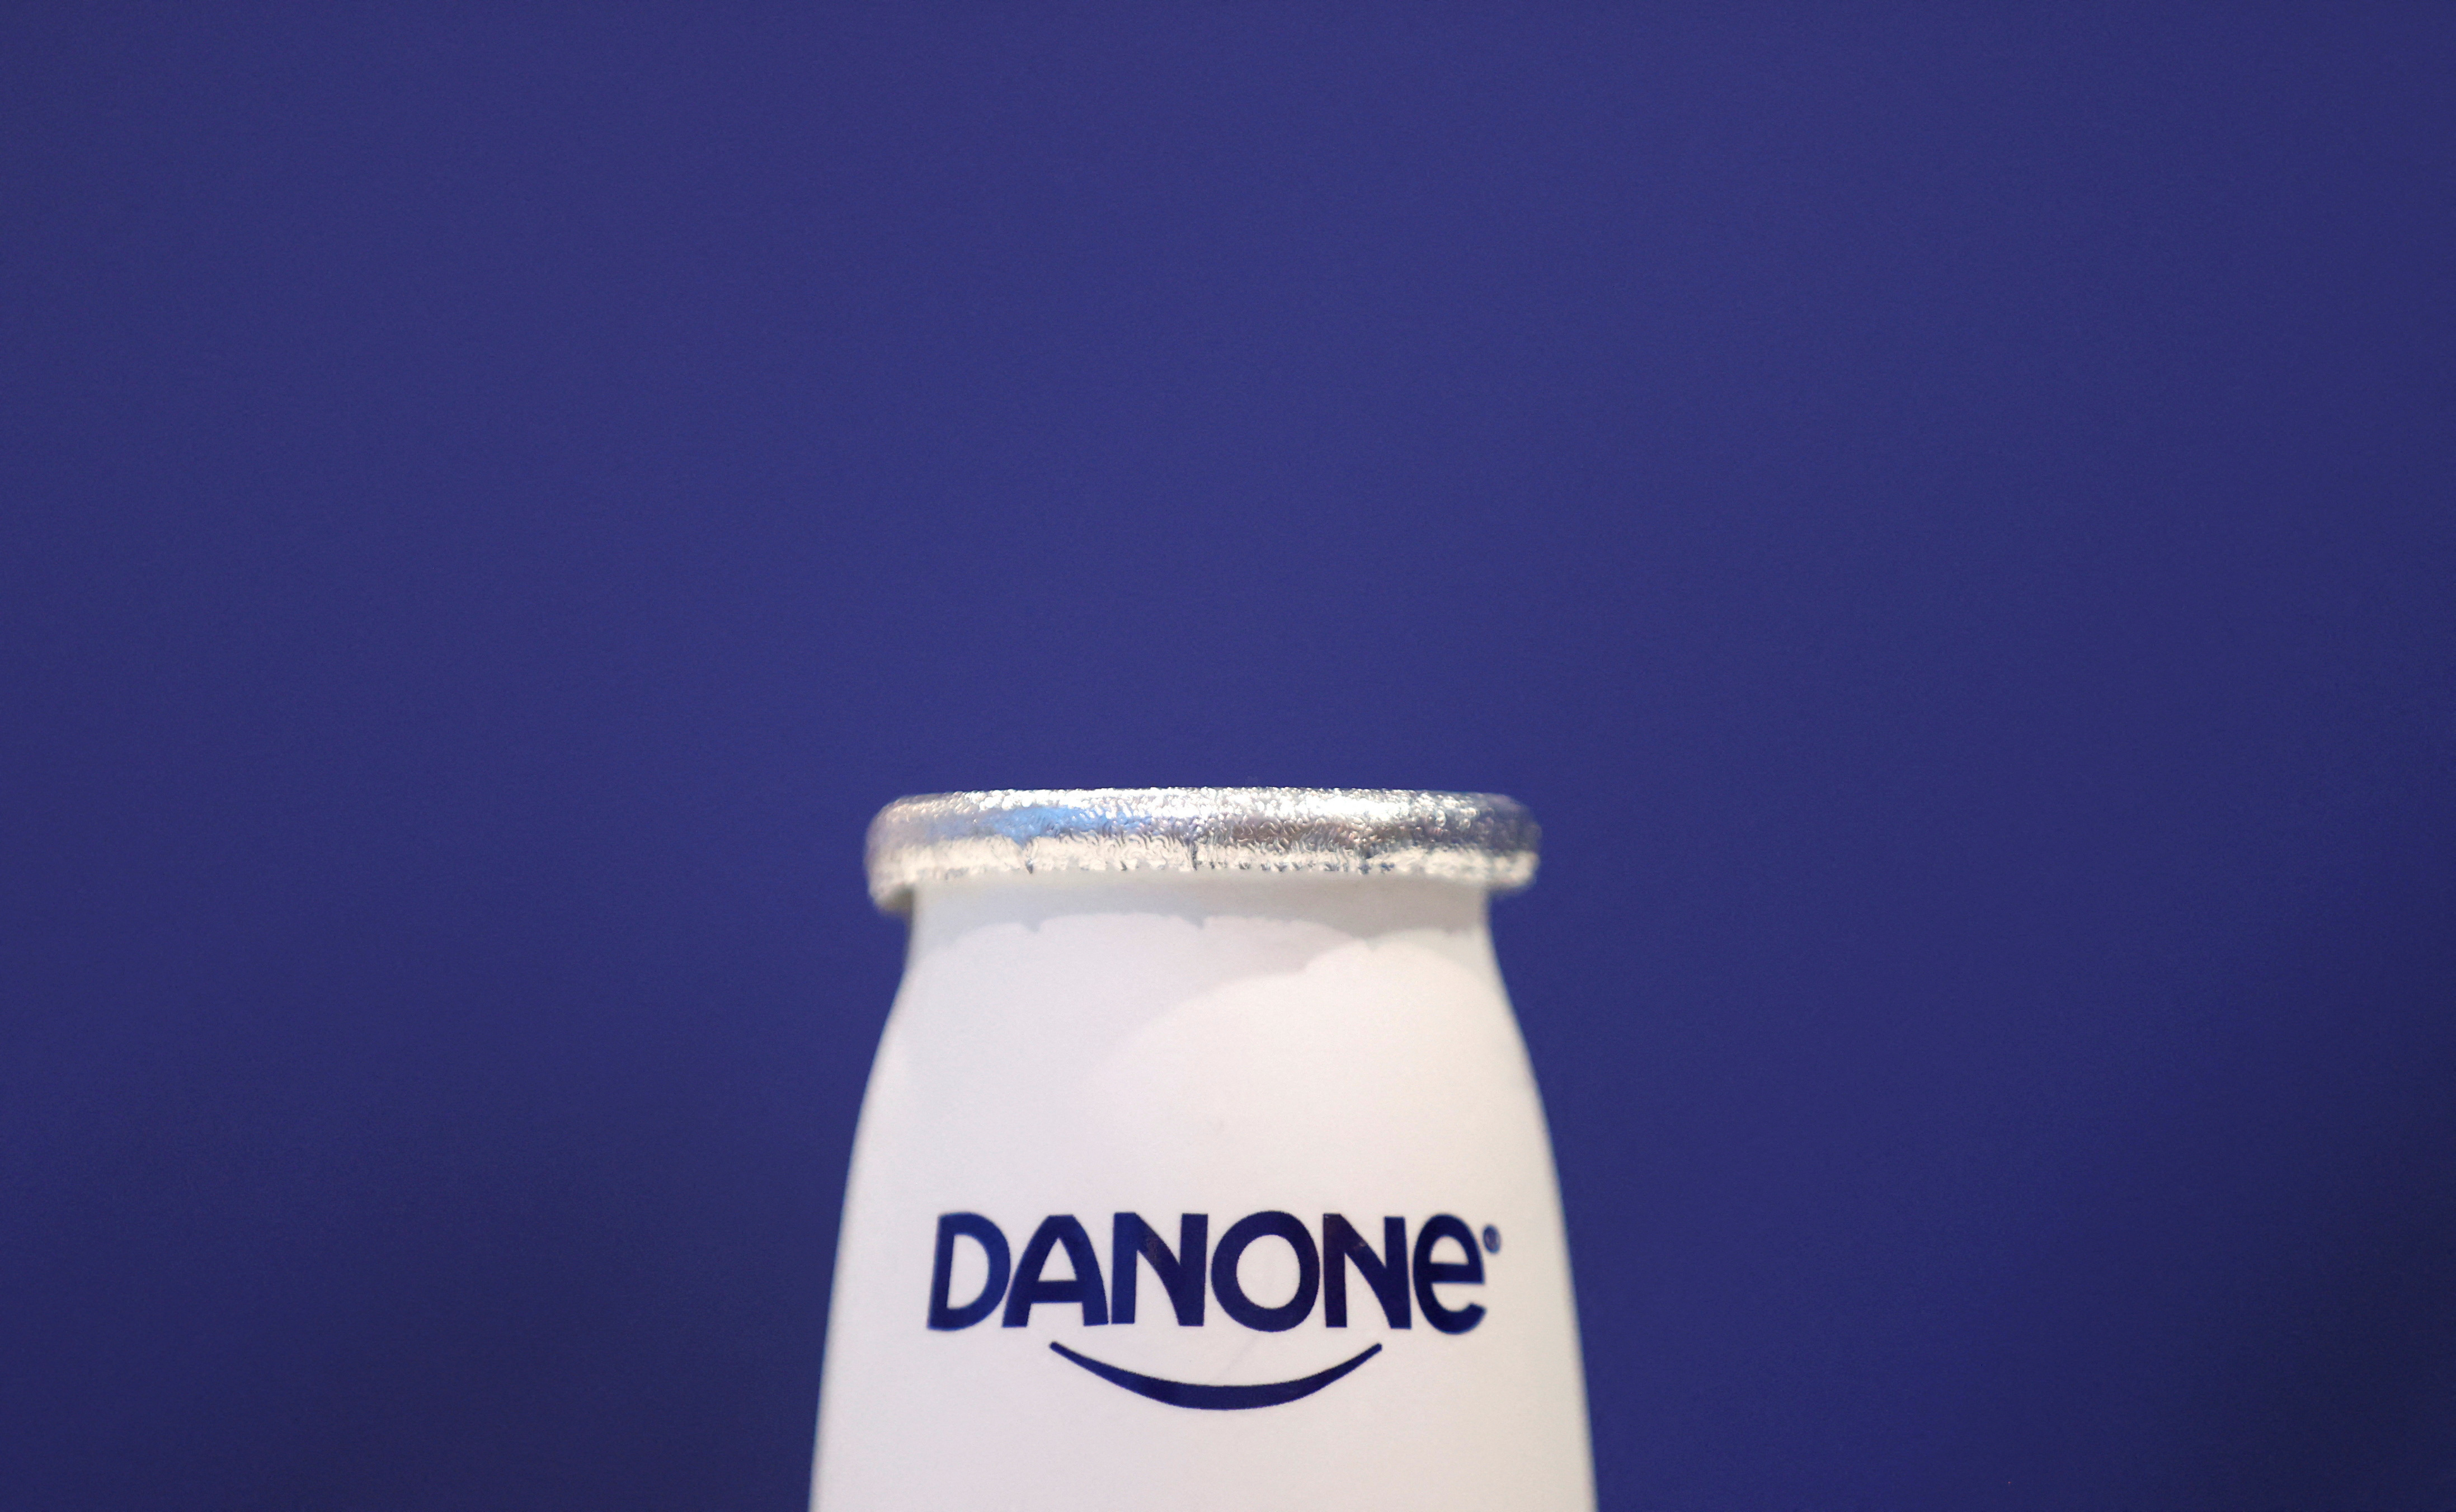 A Danone logo is seen on a product displayed in Paris